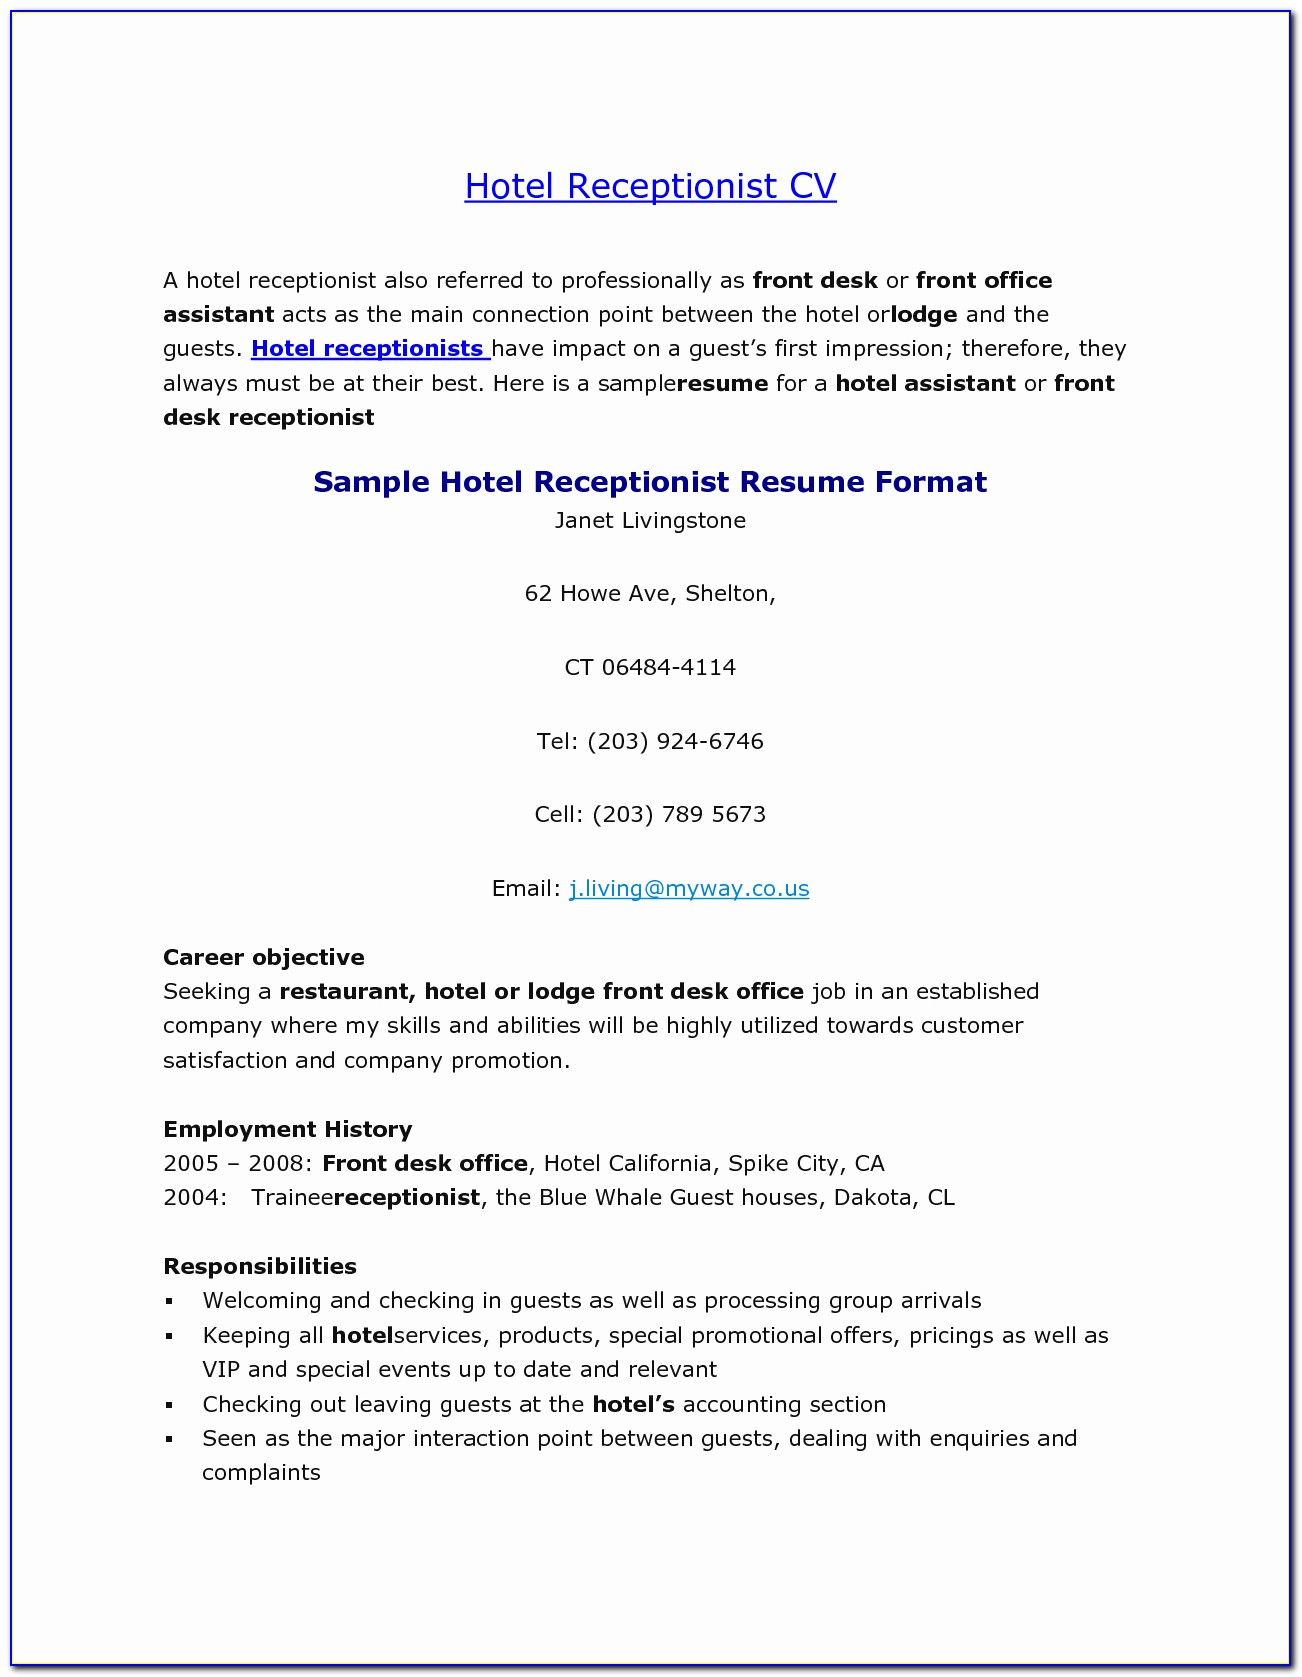 Resume Format For Hoteliers